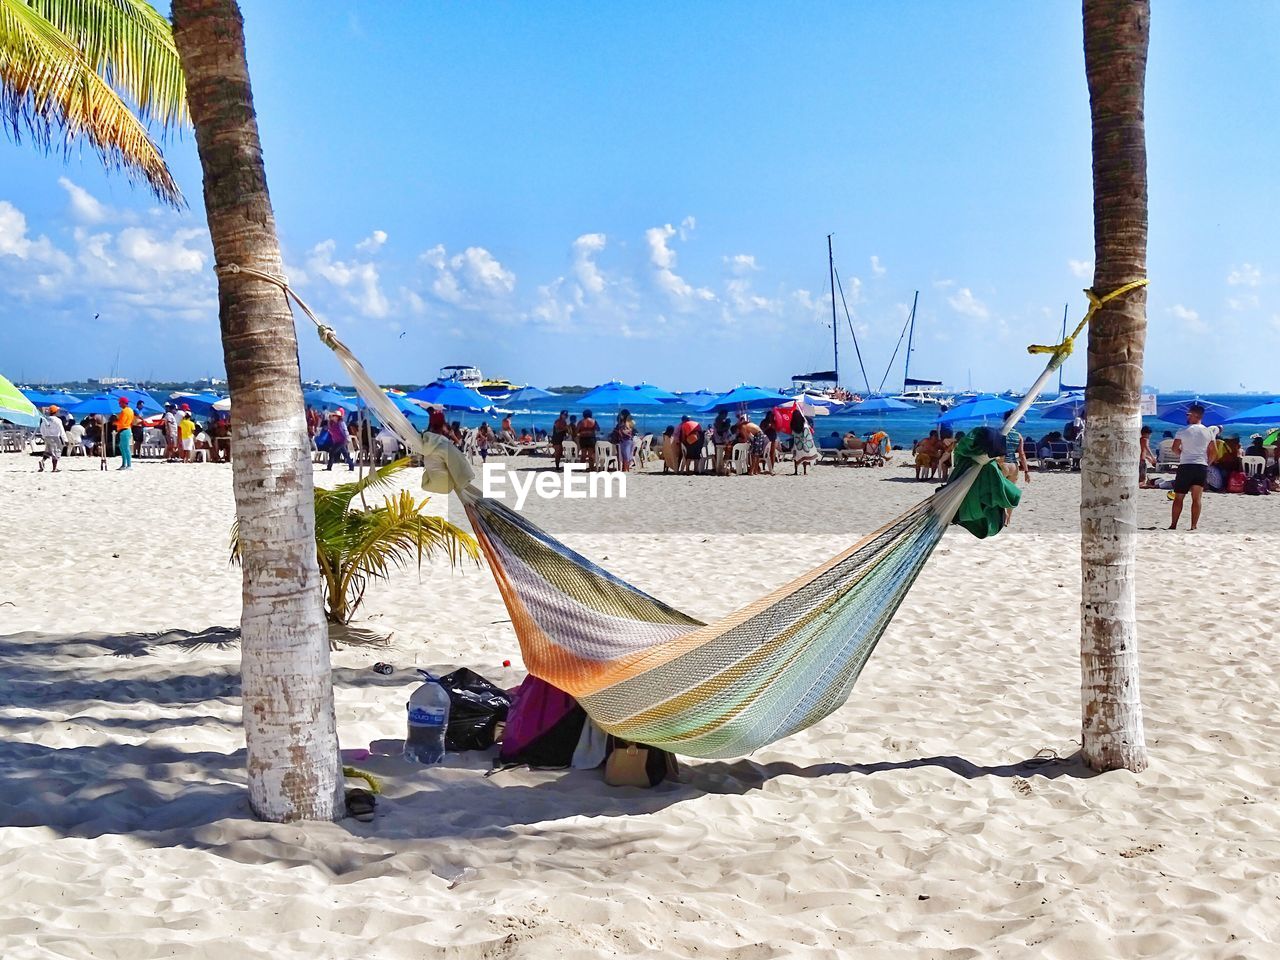 Hammock hanging on trees against people at beach